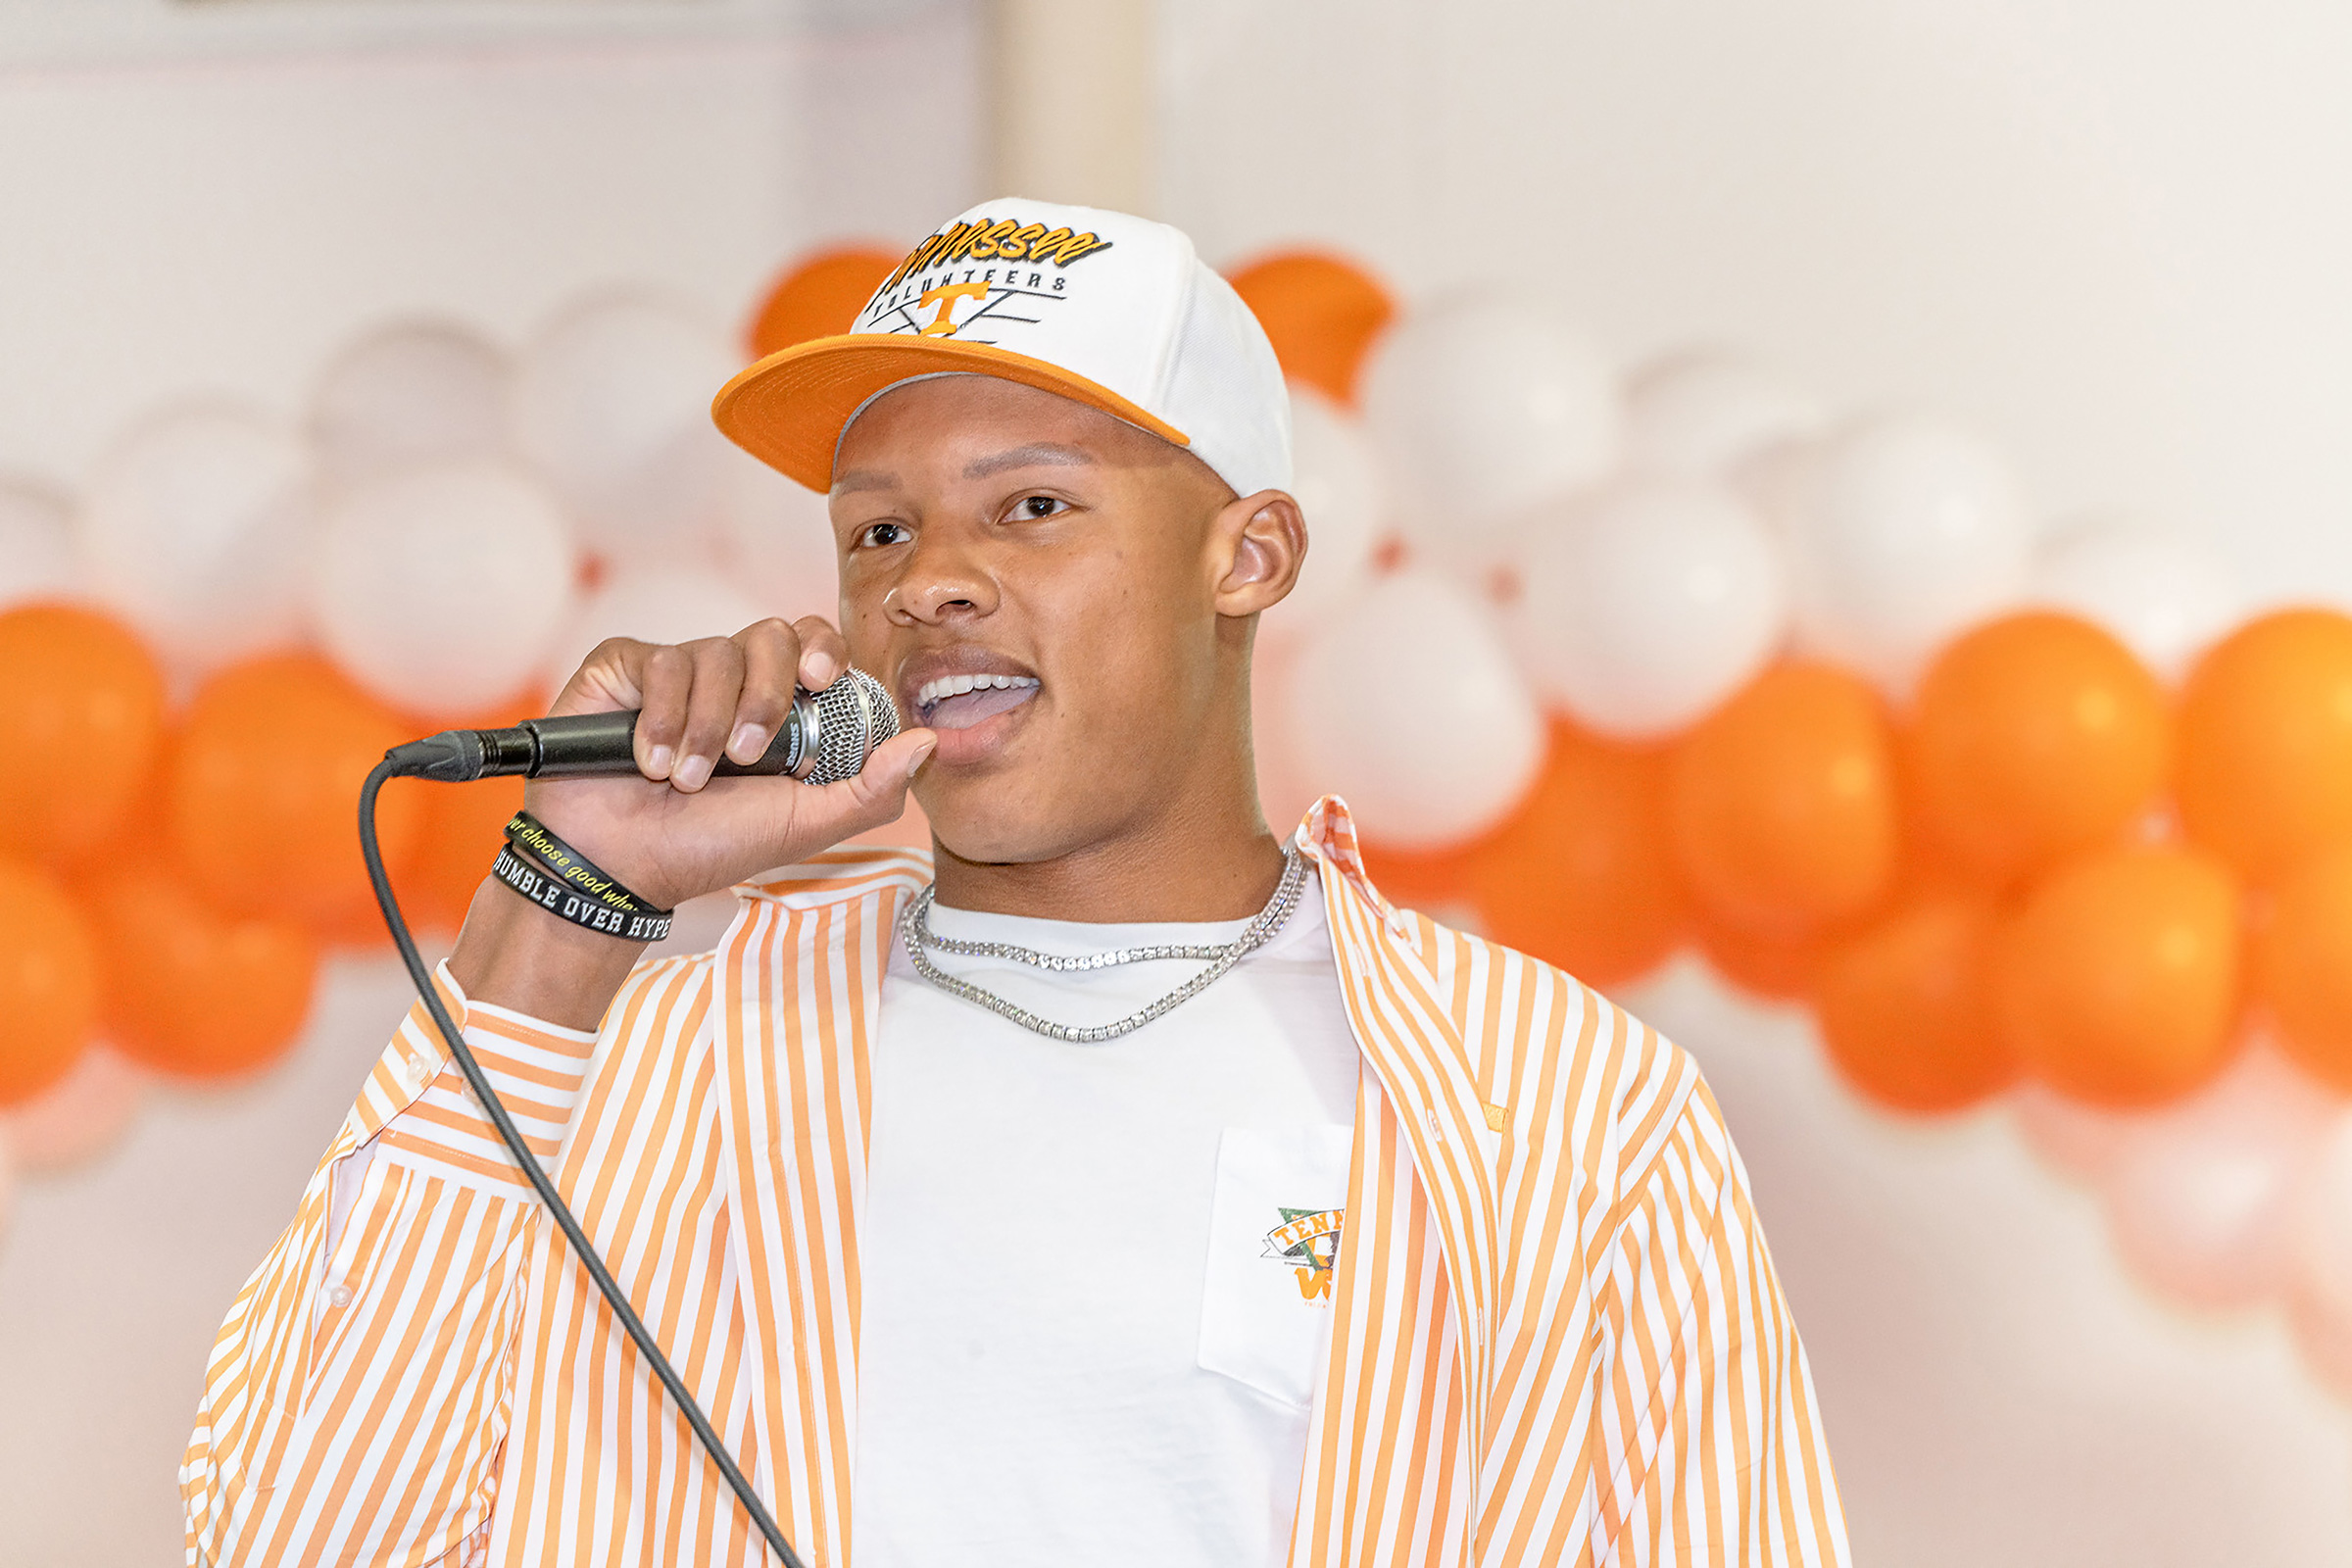 Joshua Dobbs, clad in orange and white speaks into a microphone